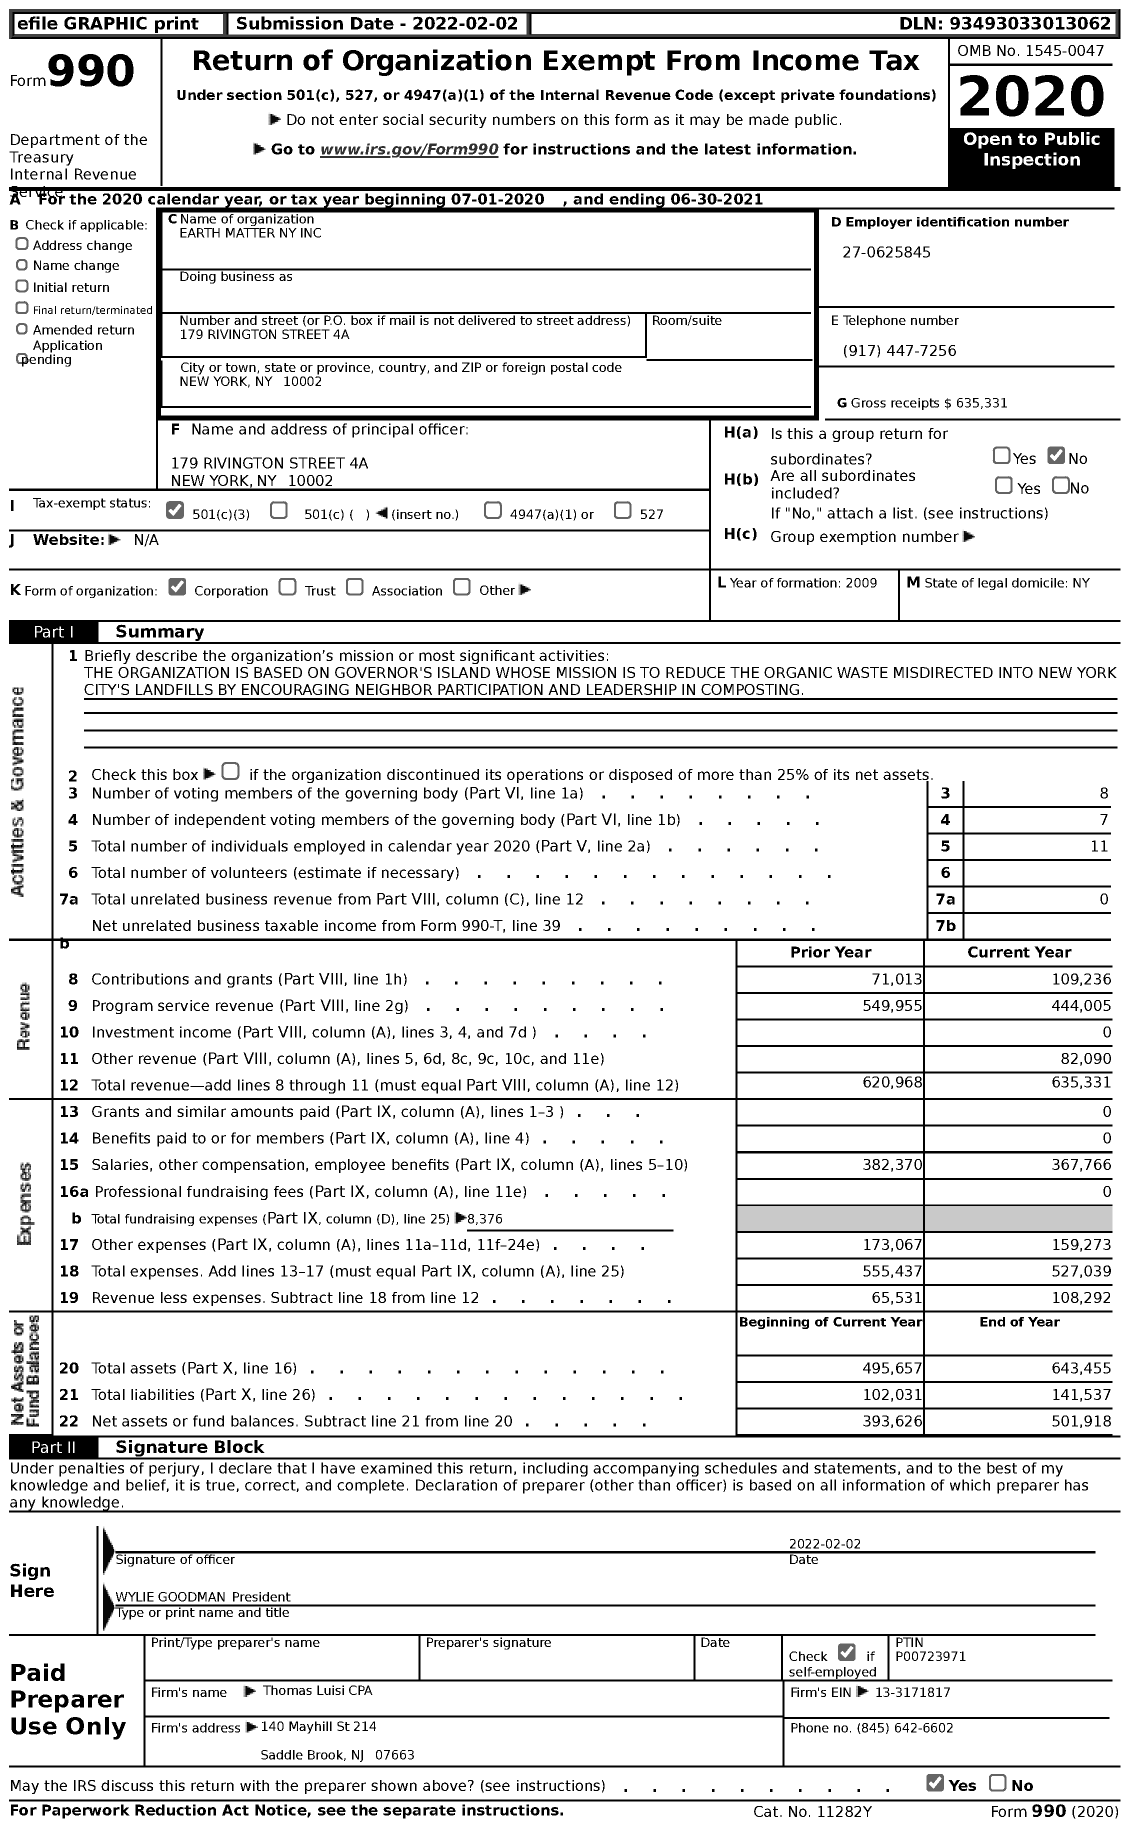 Image of first page of 2020 Form 990 for Earth Matter NY